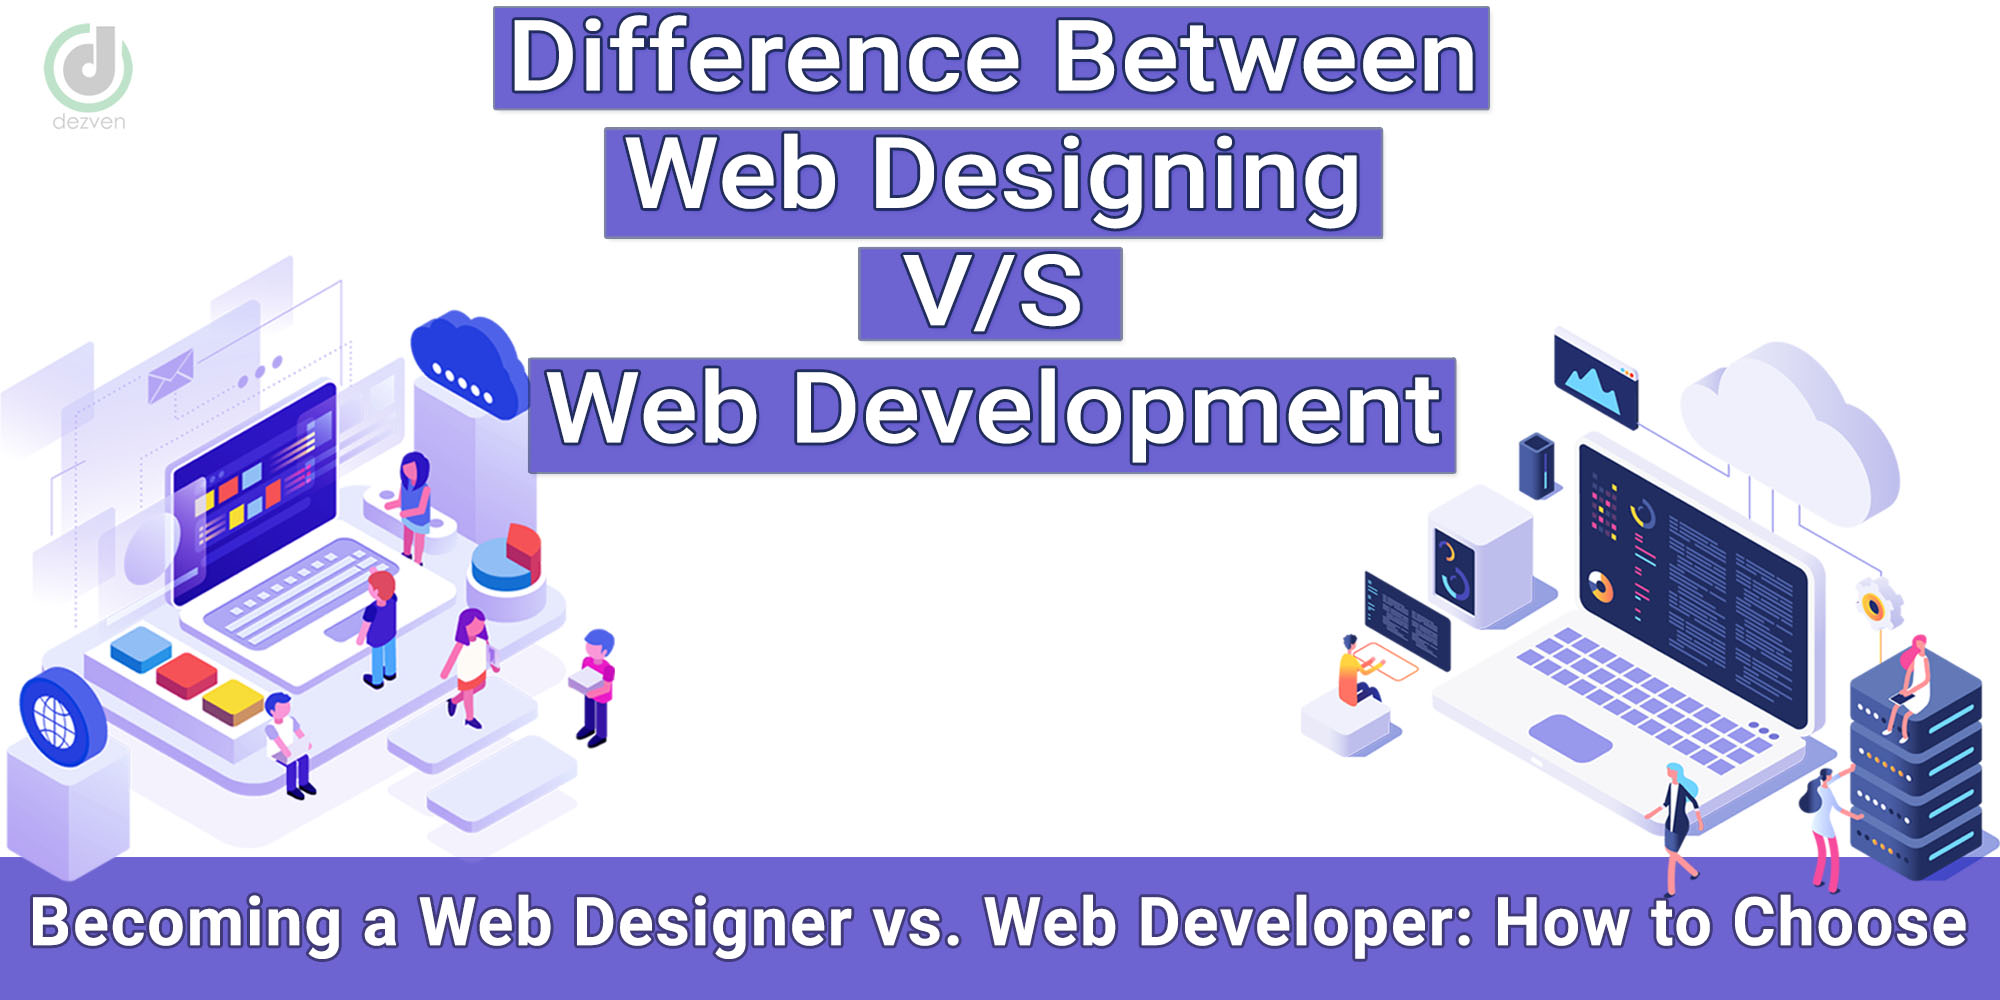 What Is The Difference Between Web Designing And Web Development